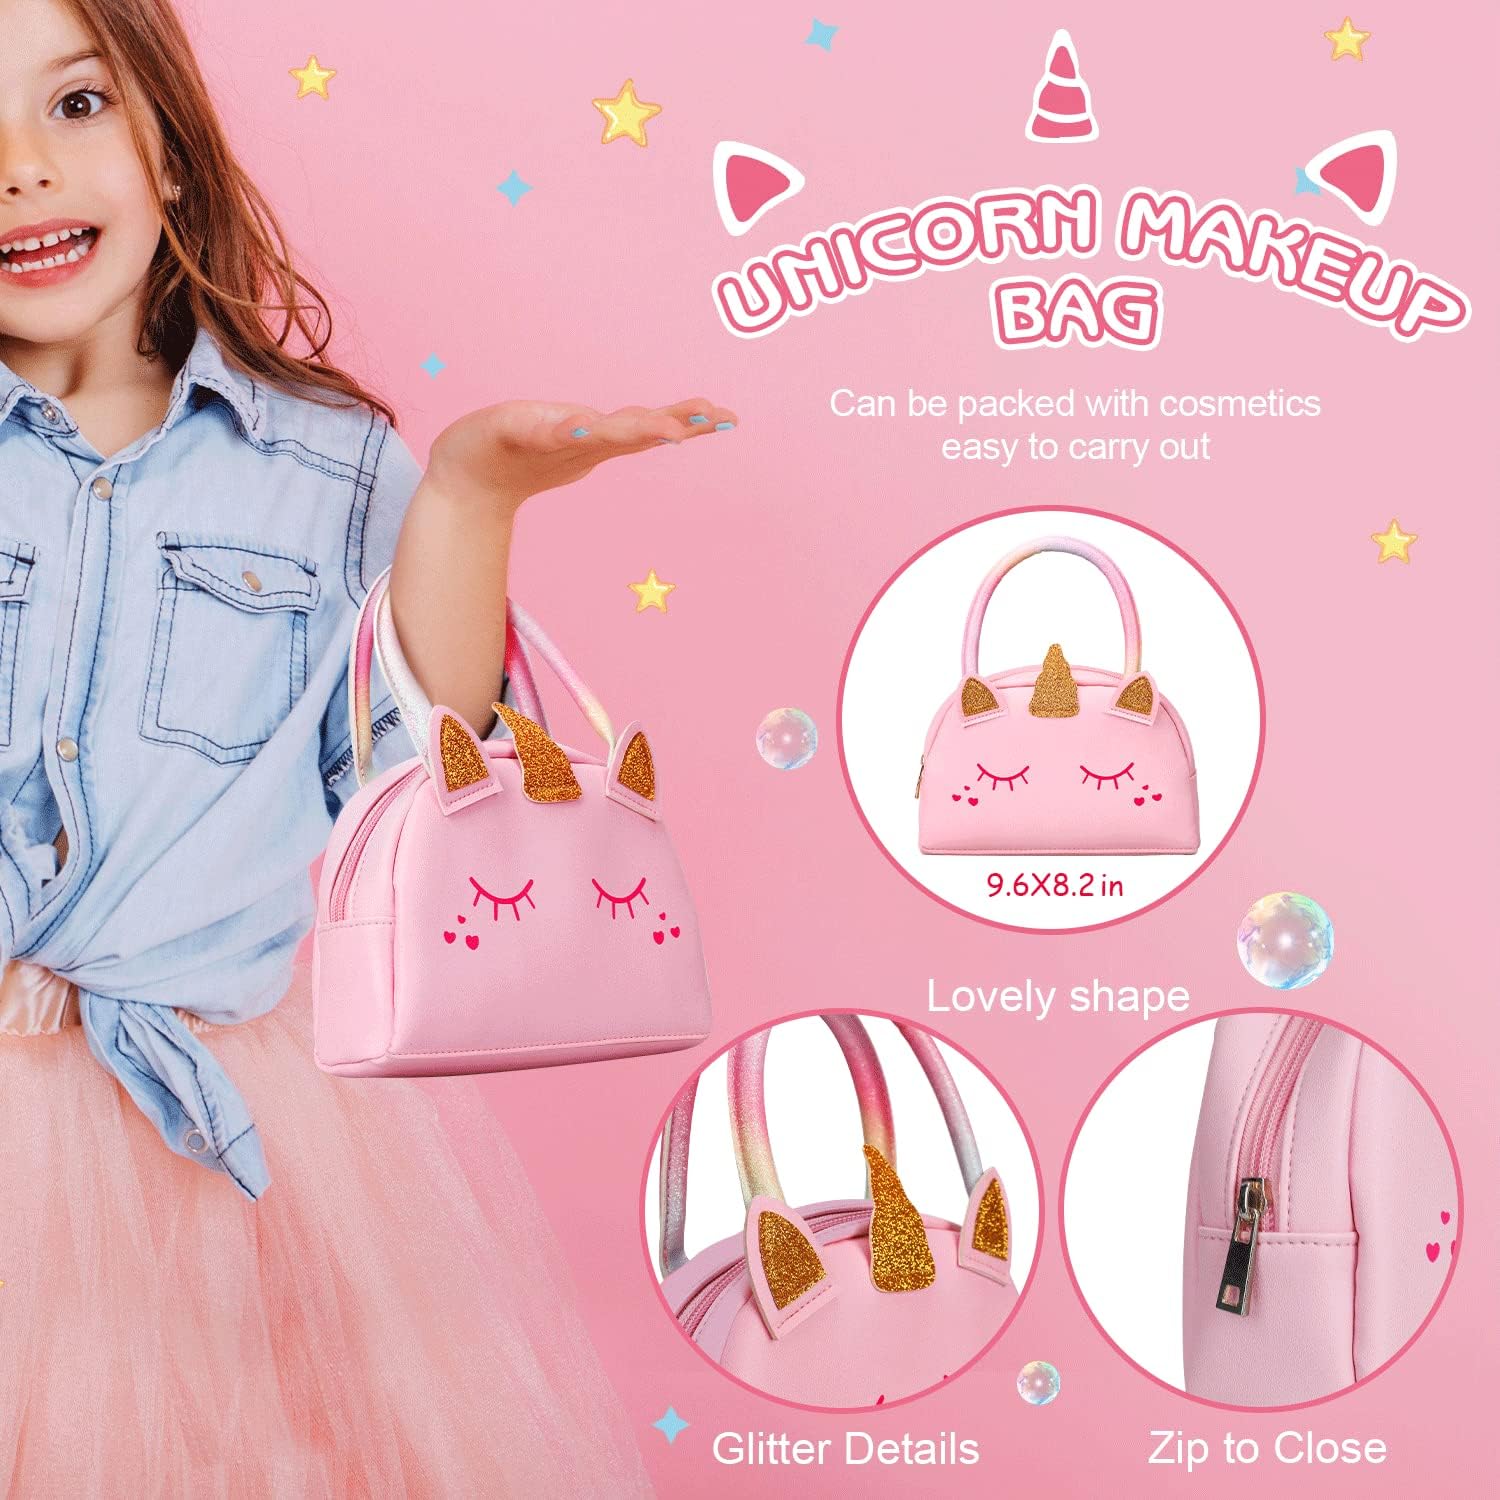 LinJie Makeup Kit for Girls, With Pink Unicorn Bag, Safe Non-Toxic,、Washable Makeup Toys、 Children's Real Makeup Bag For Little Girls, Playing With Makeup Children's Birthday Gifts